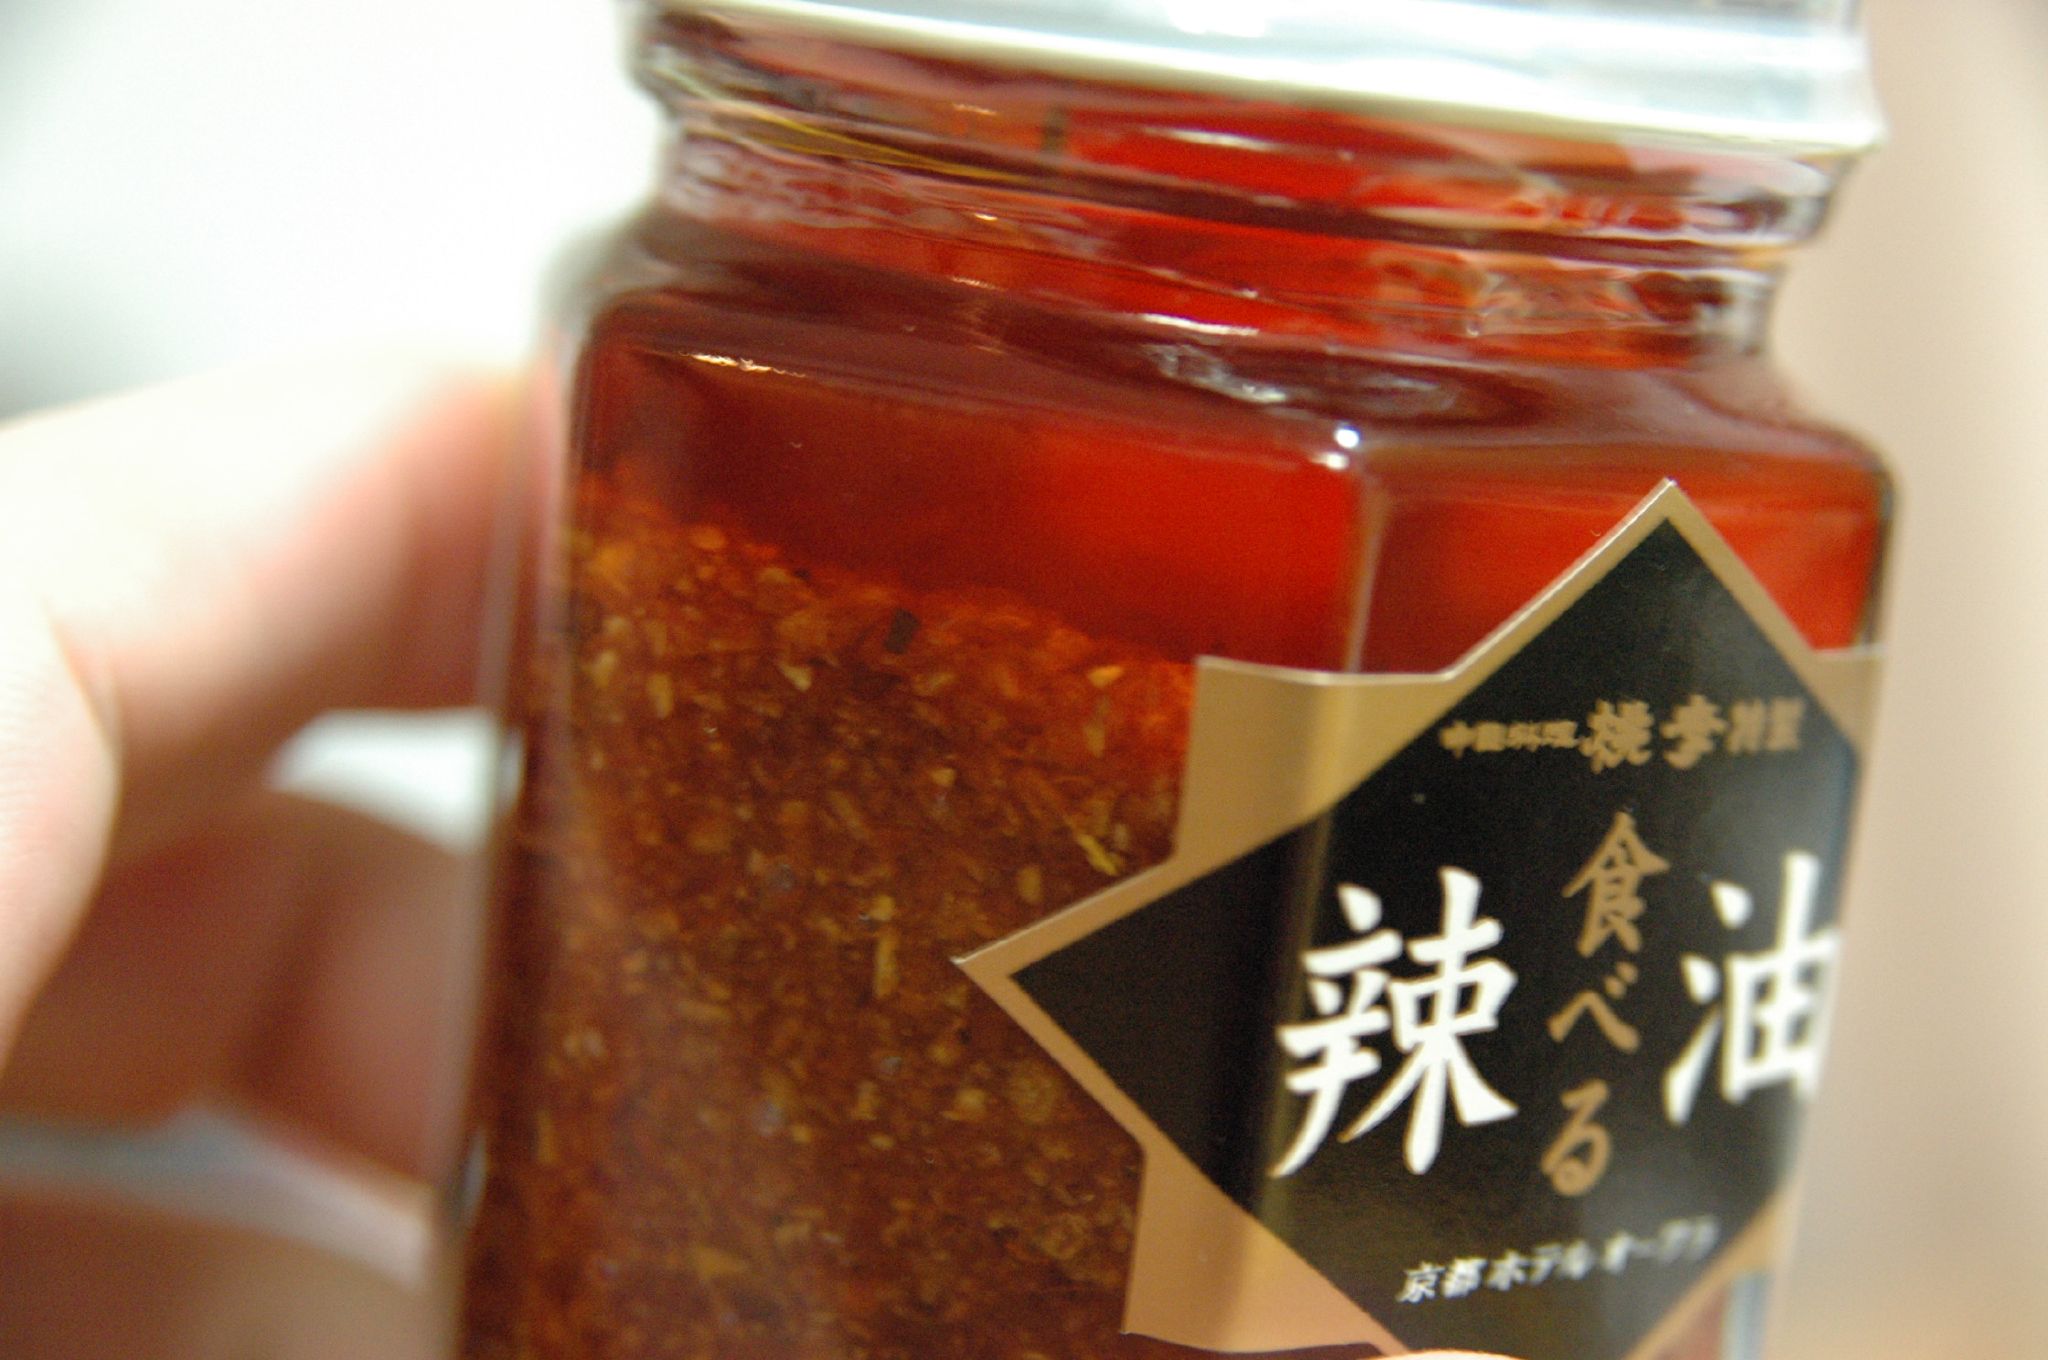 a jar of  sauce with asian writing on it